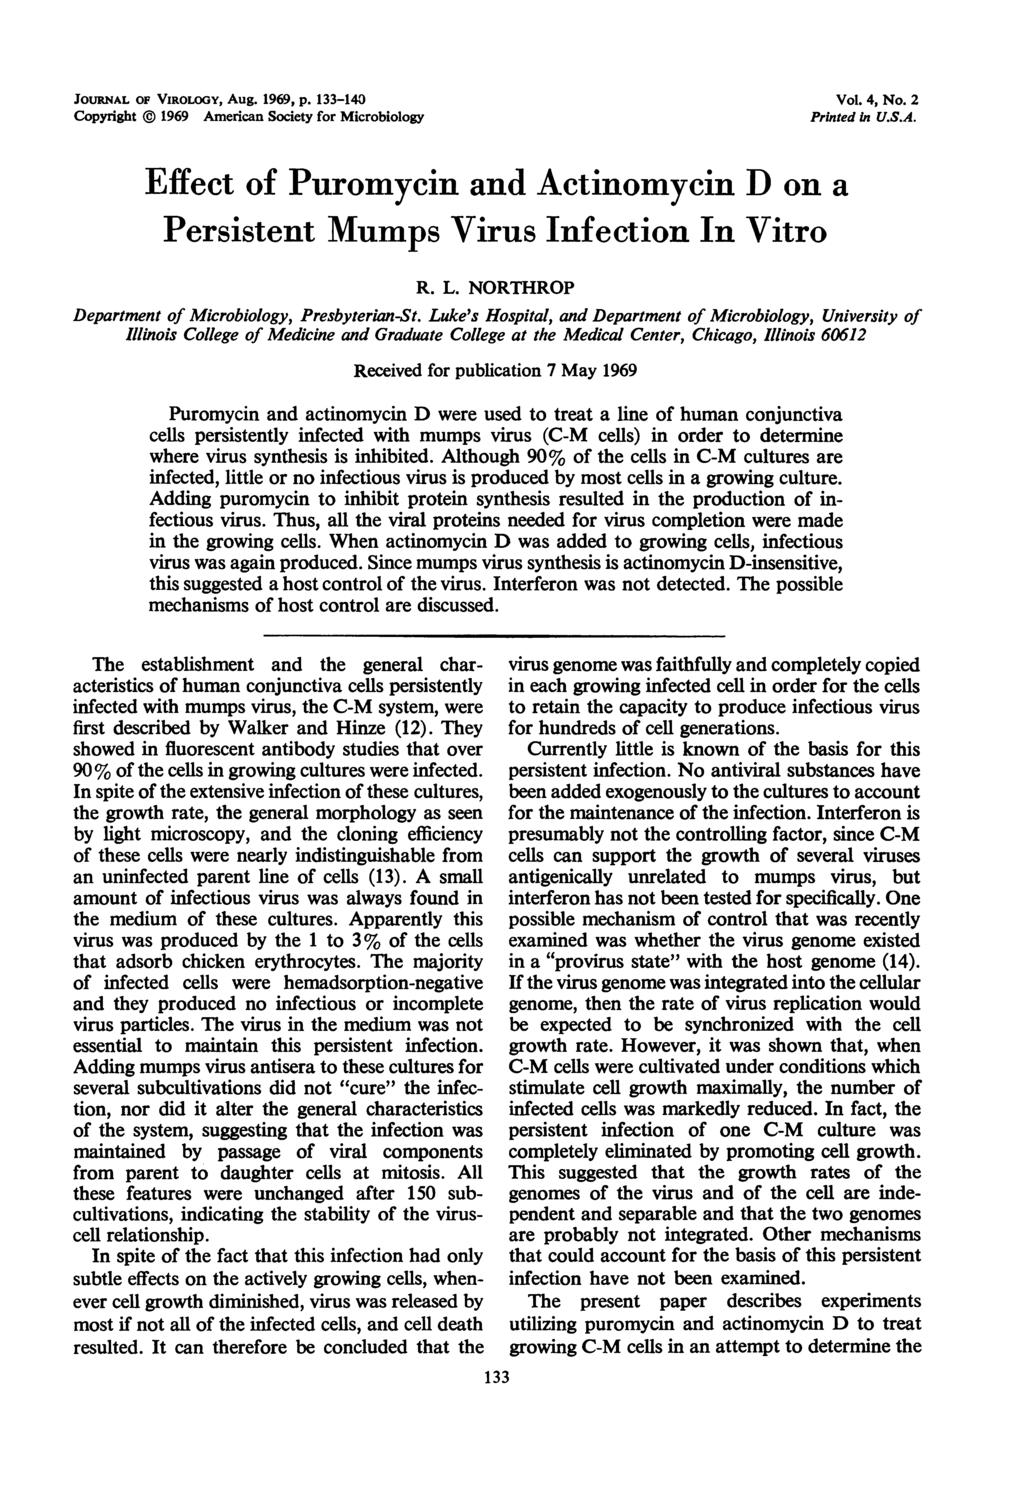 JOURNAL OF VIROLOGY, Aug. 1969, p. 133-143 Copyright 1969 American Society for Microbiology Vol. 4, No. 2 Printed in U.S.A. Effect of Puromycin and Actinomycin D on a Persistent Mumps Virus Infection In Vitro R.